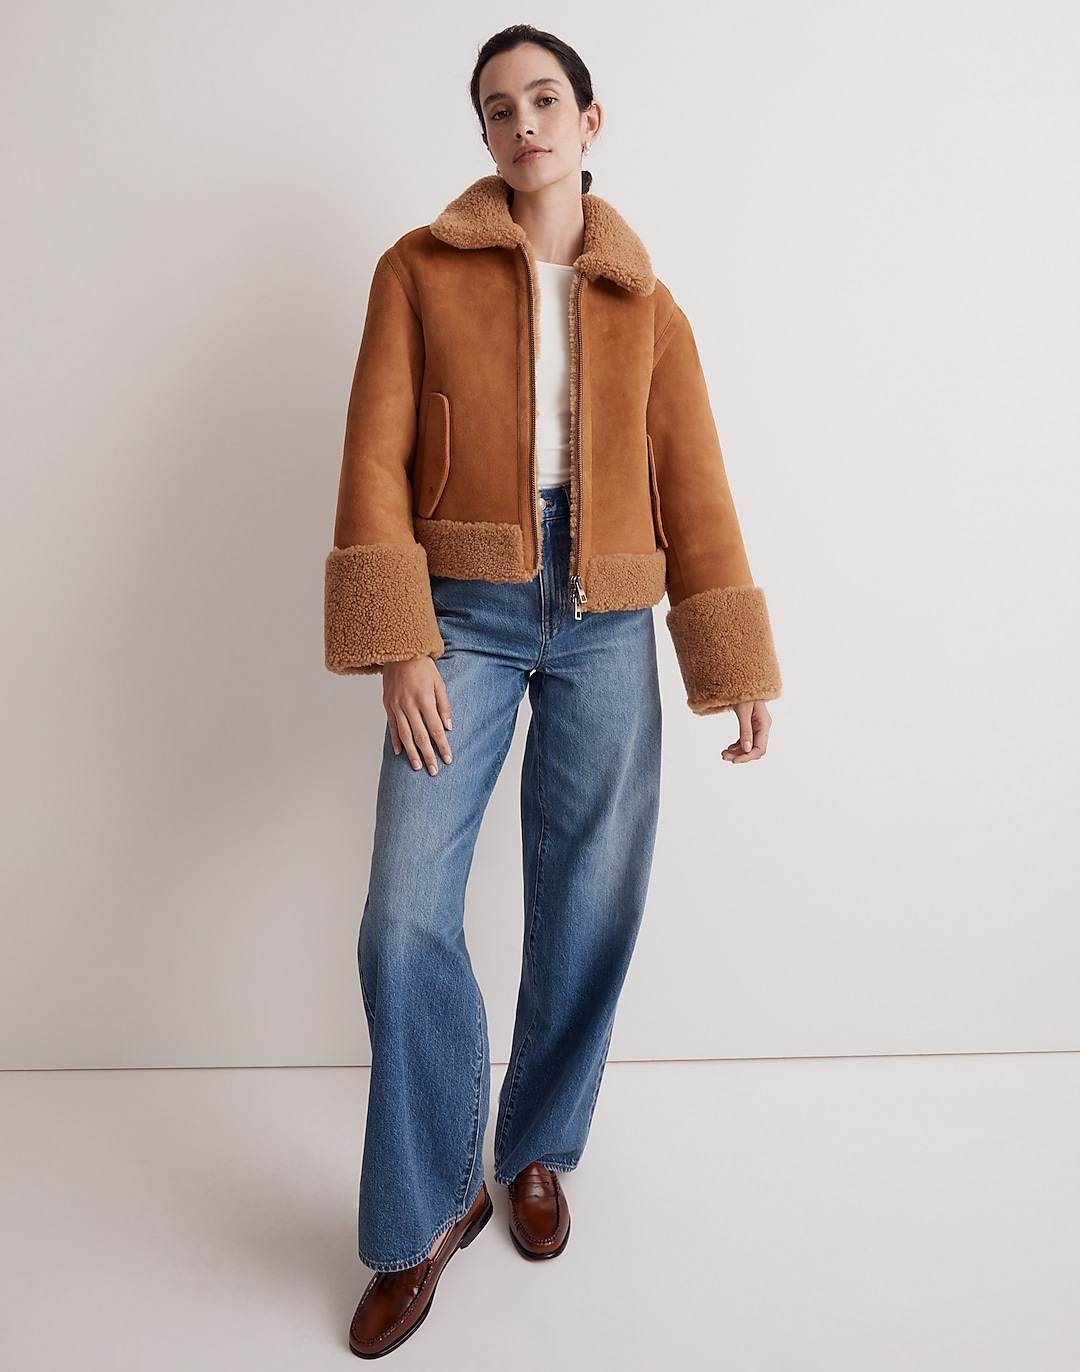 Shearling Zip-Front Jacket | Madewell